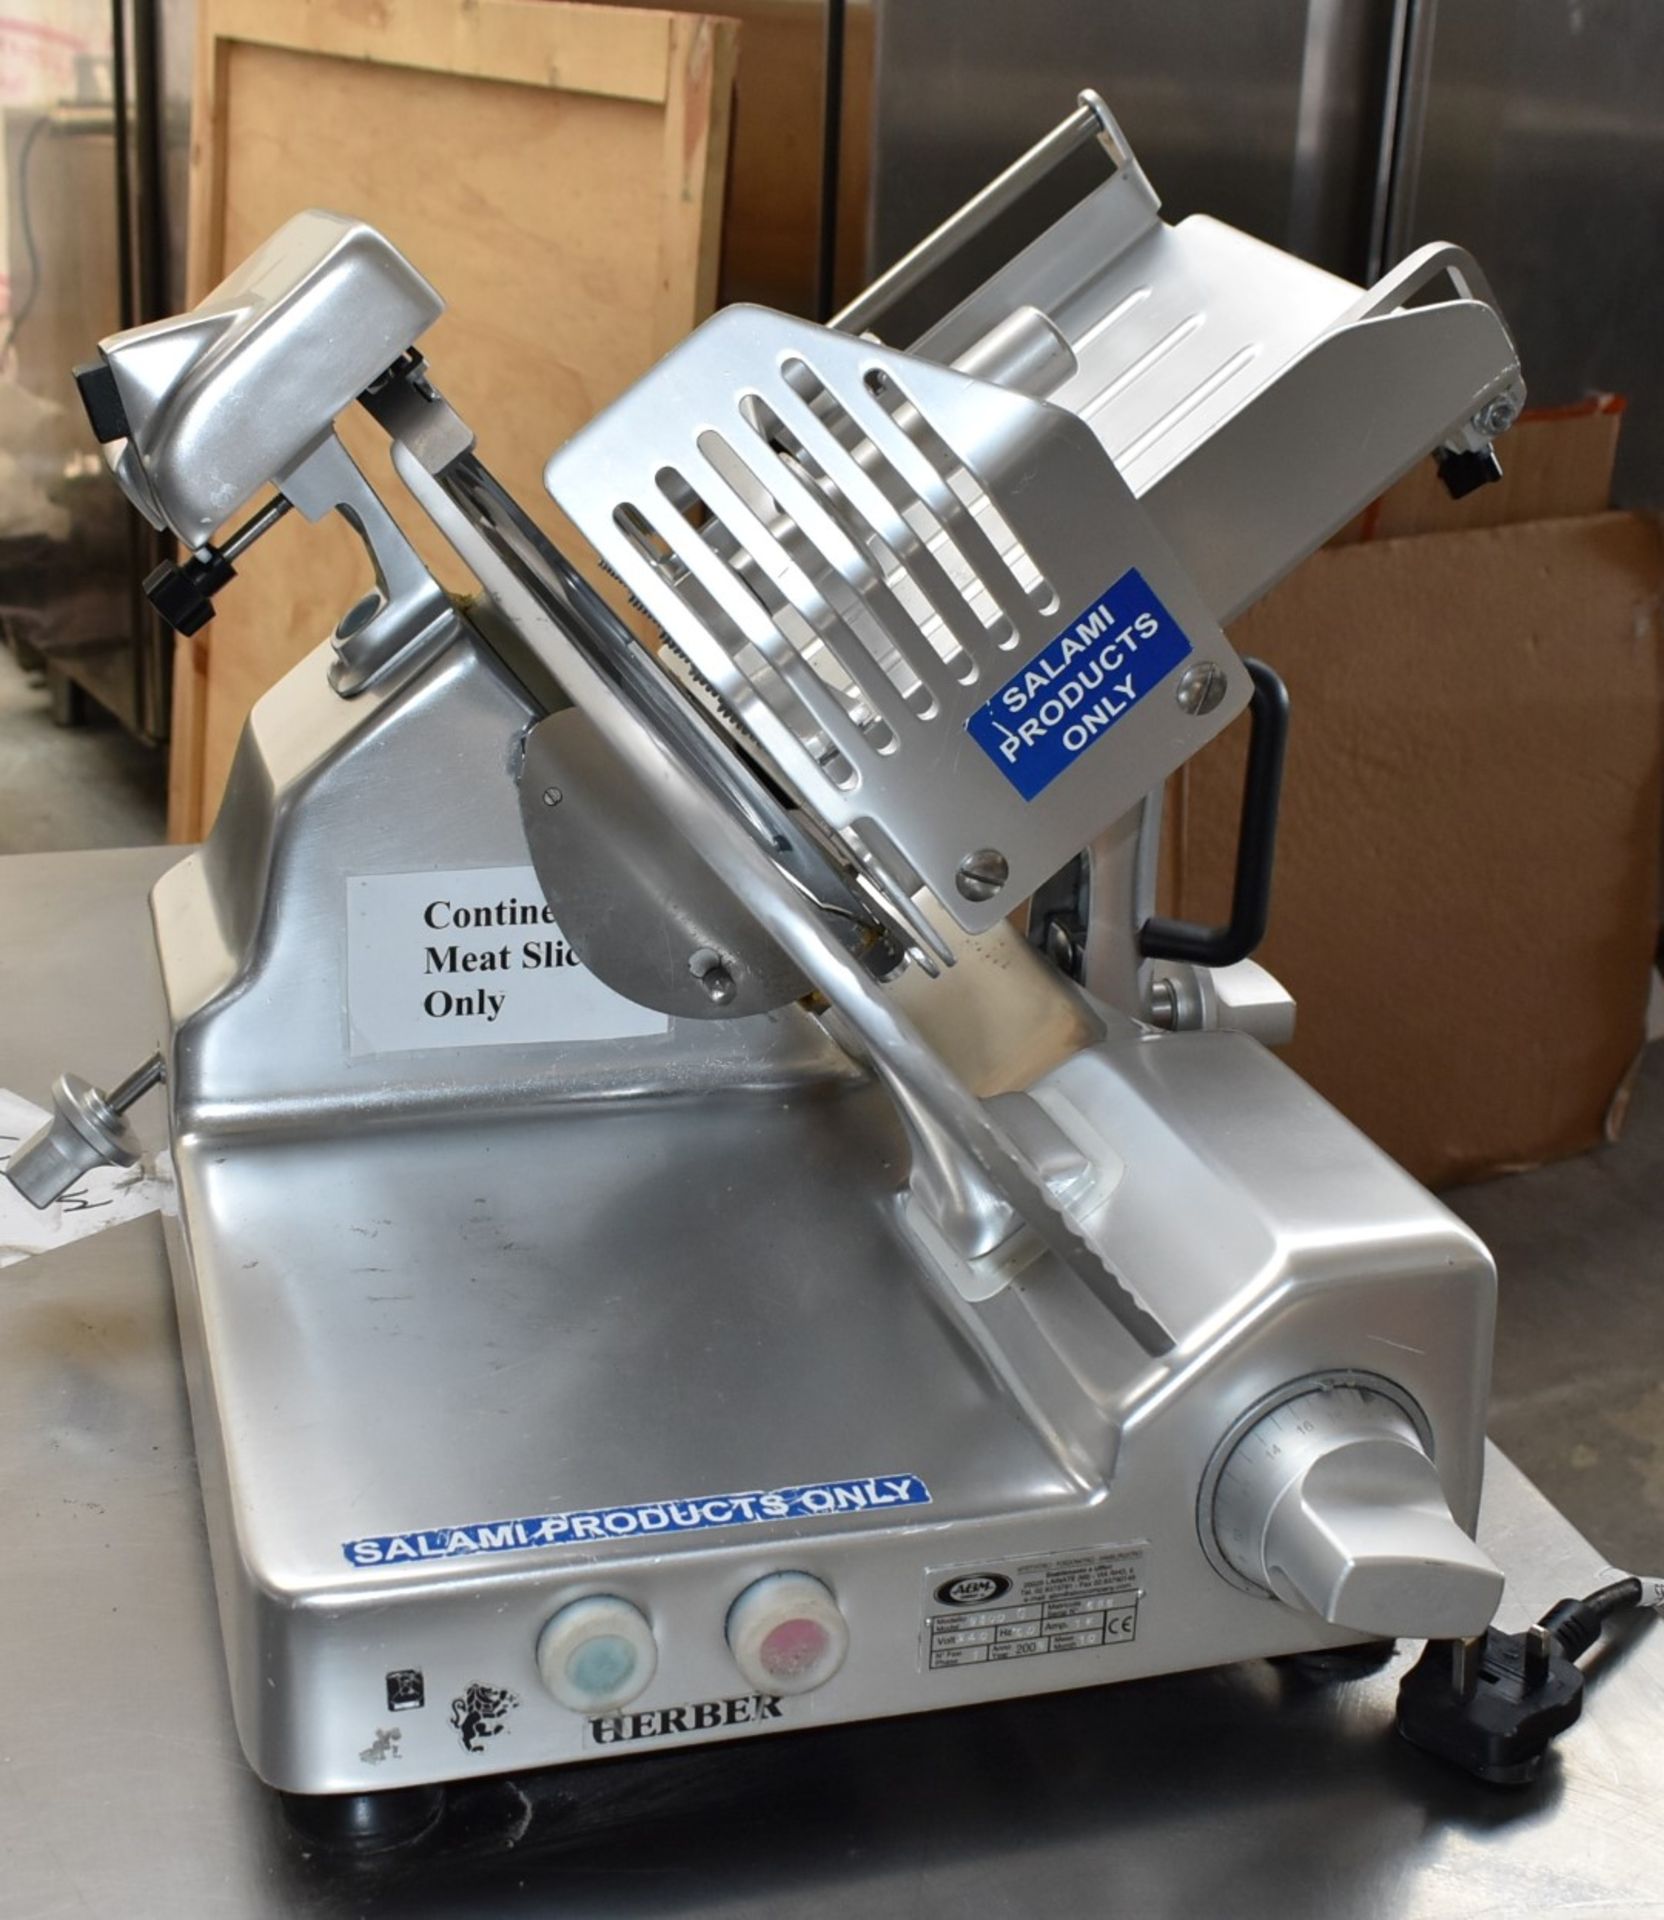 1 x Herbert 9300G Gravity Manual 12 Inch Meat Slicer By ABM - Max Cut Thickness 15mm - RRP £1,794 - Image 7 of 10